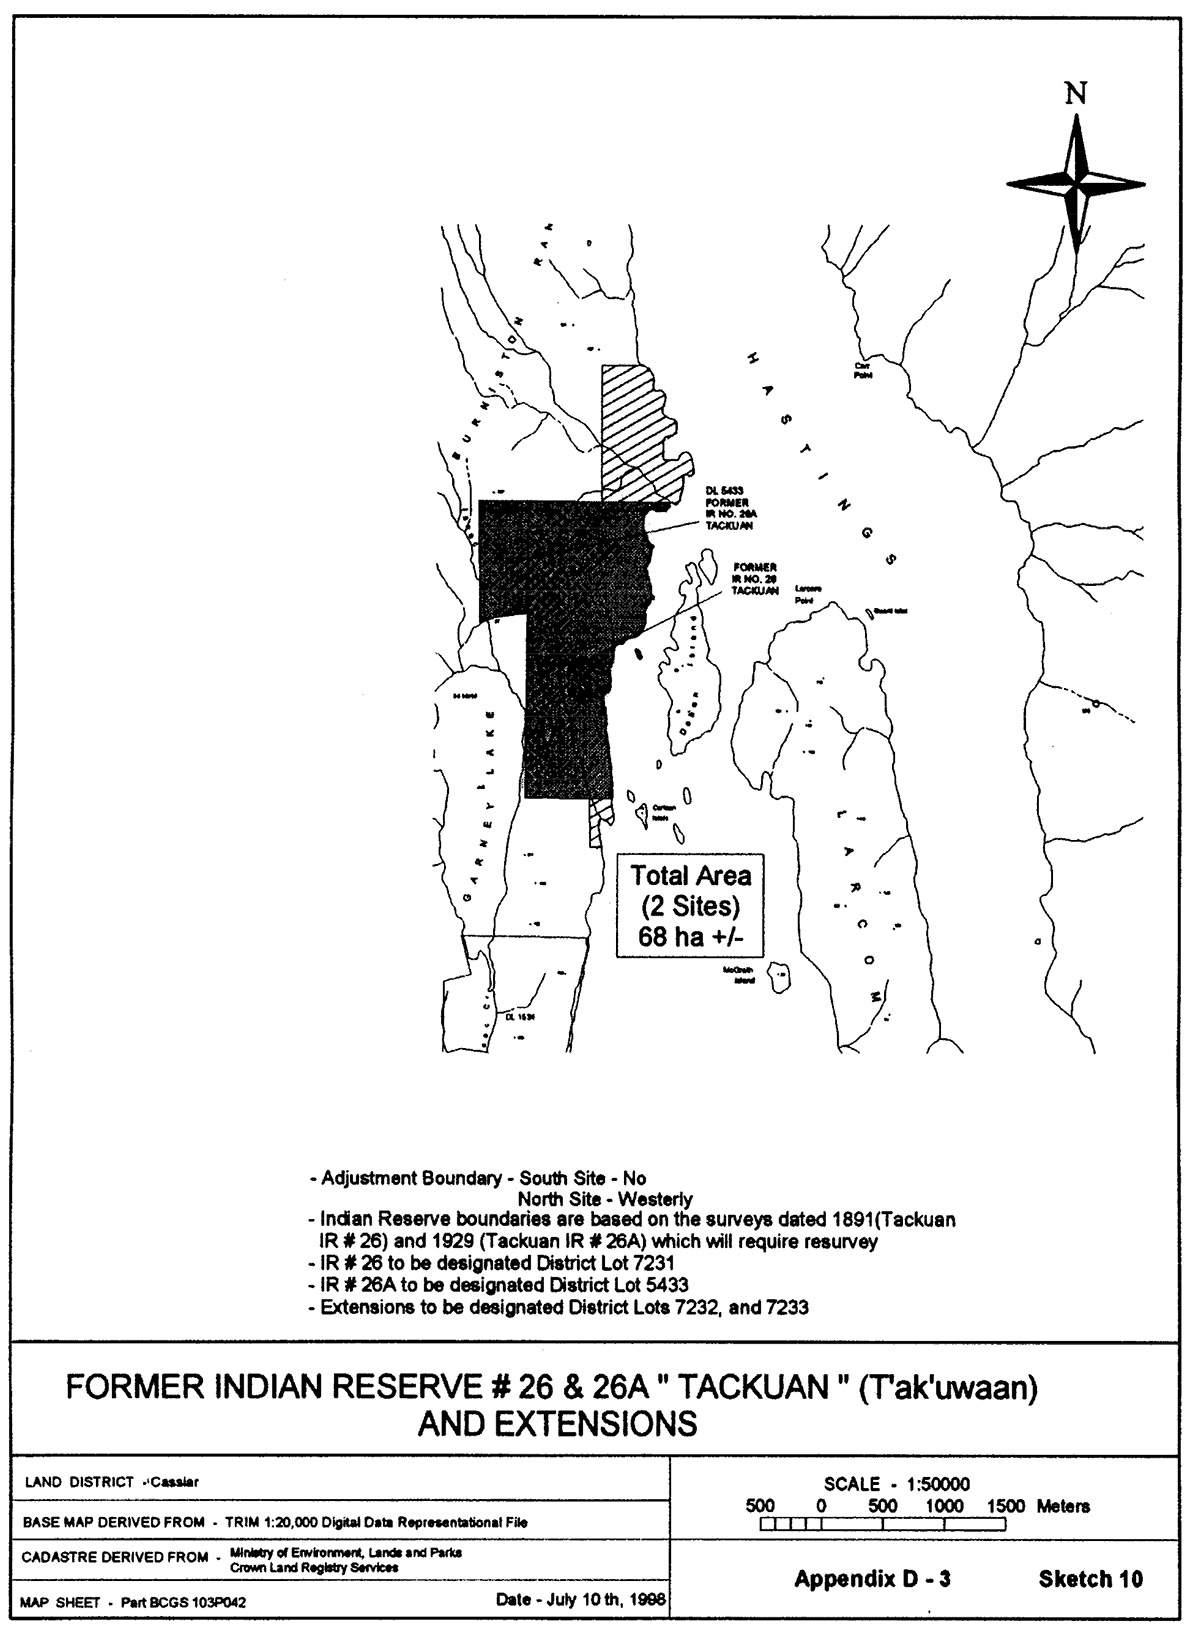 Former Indian Reserves No. 26 and 26A Tackuan (T'ak'uwaan) and extensions